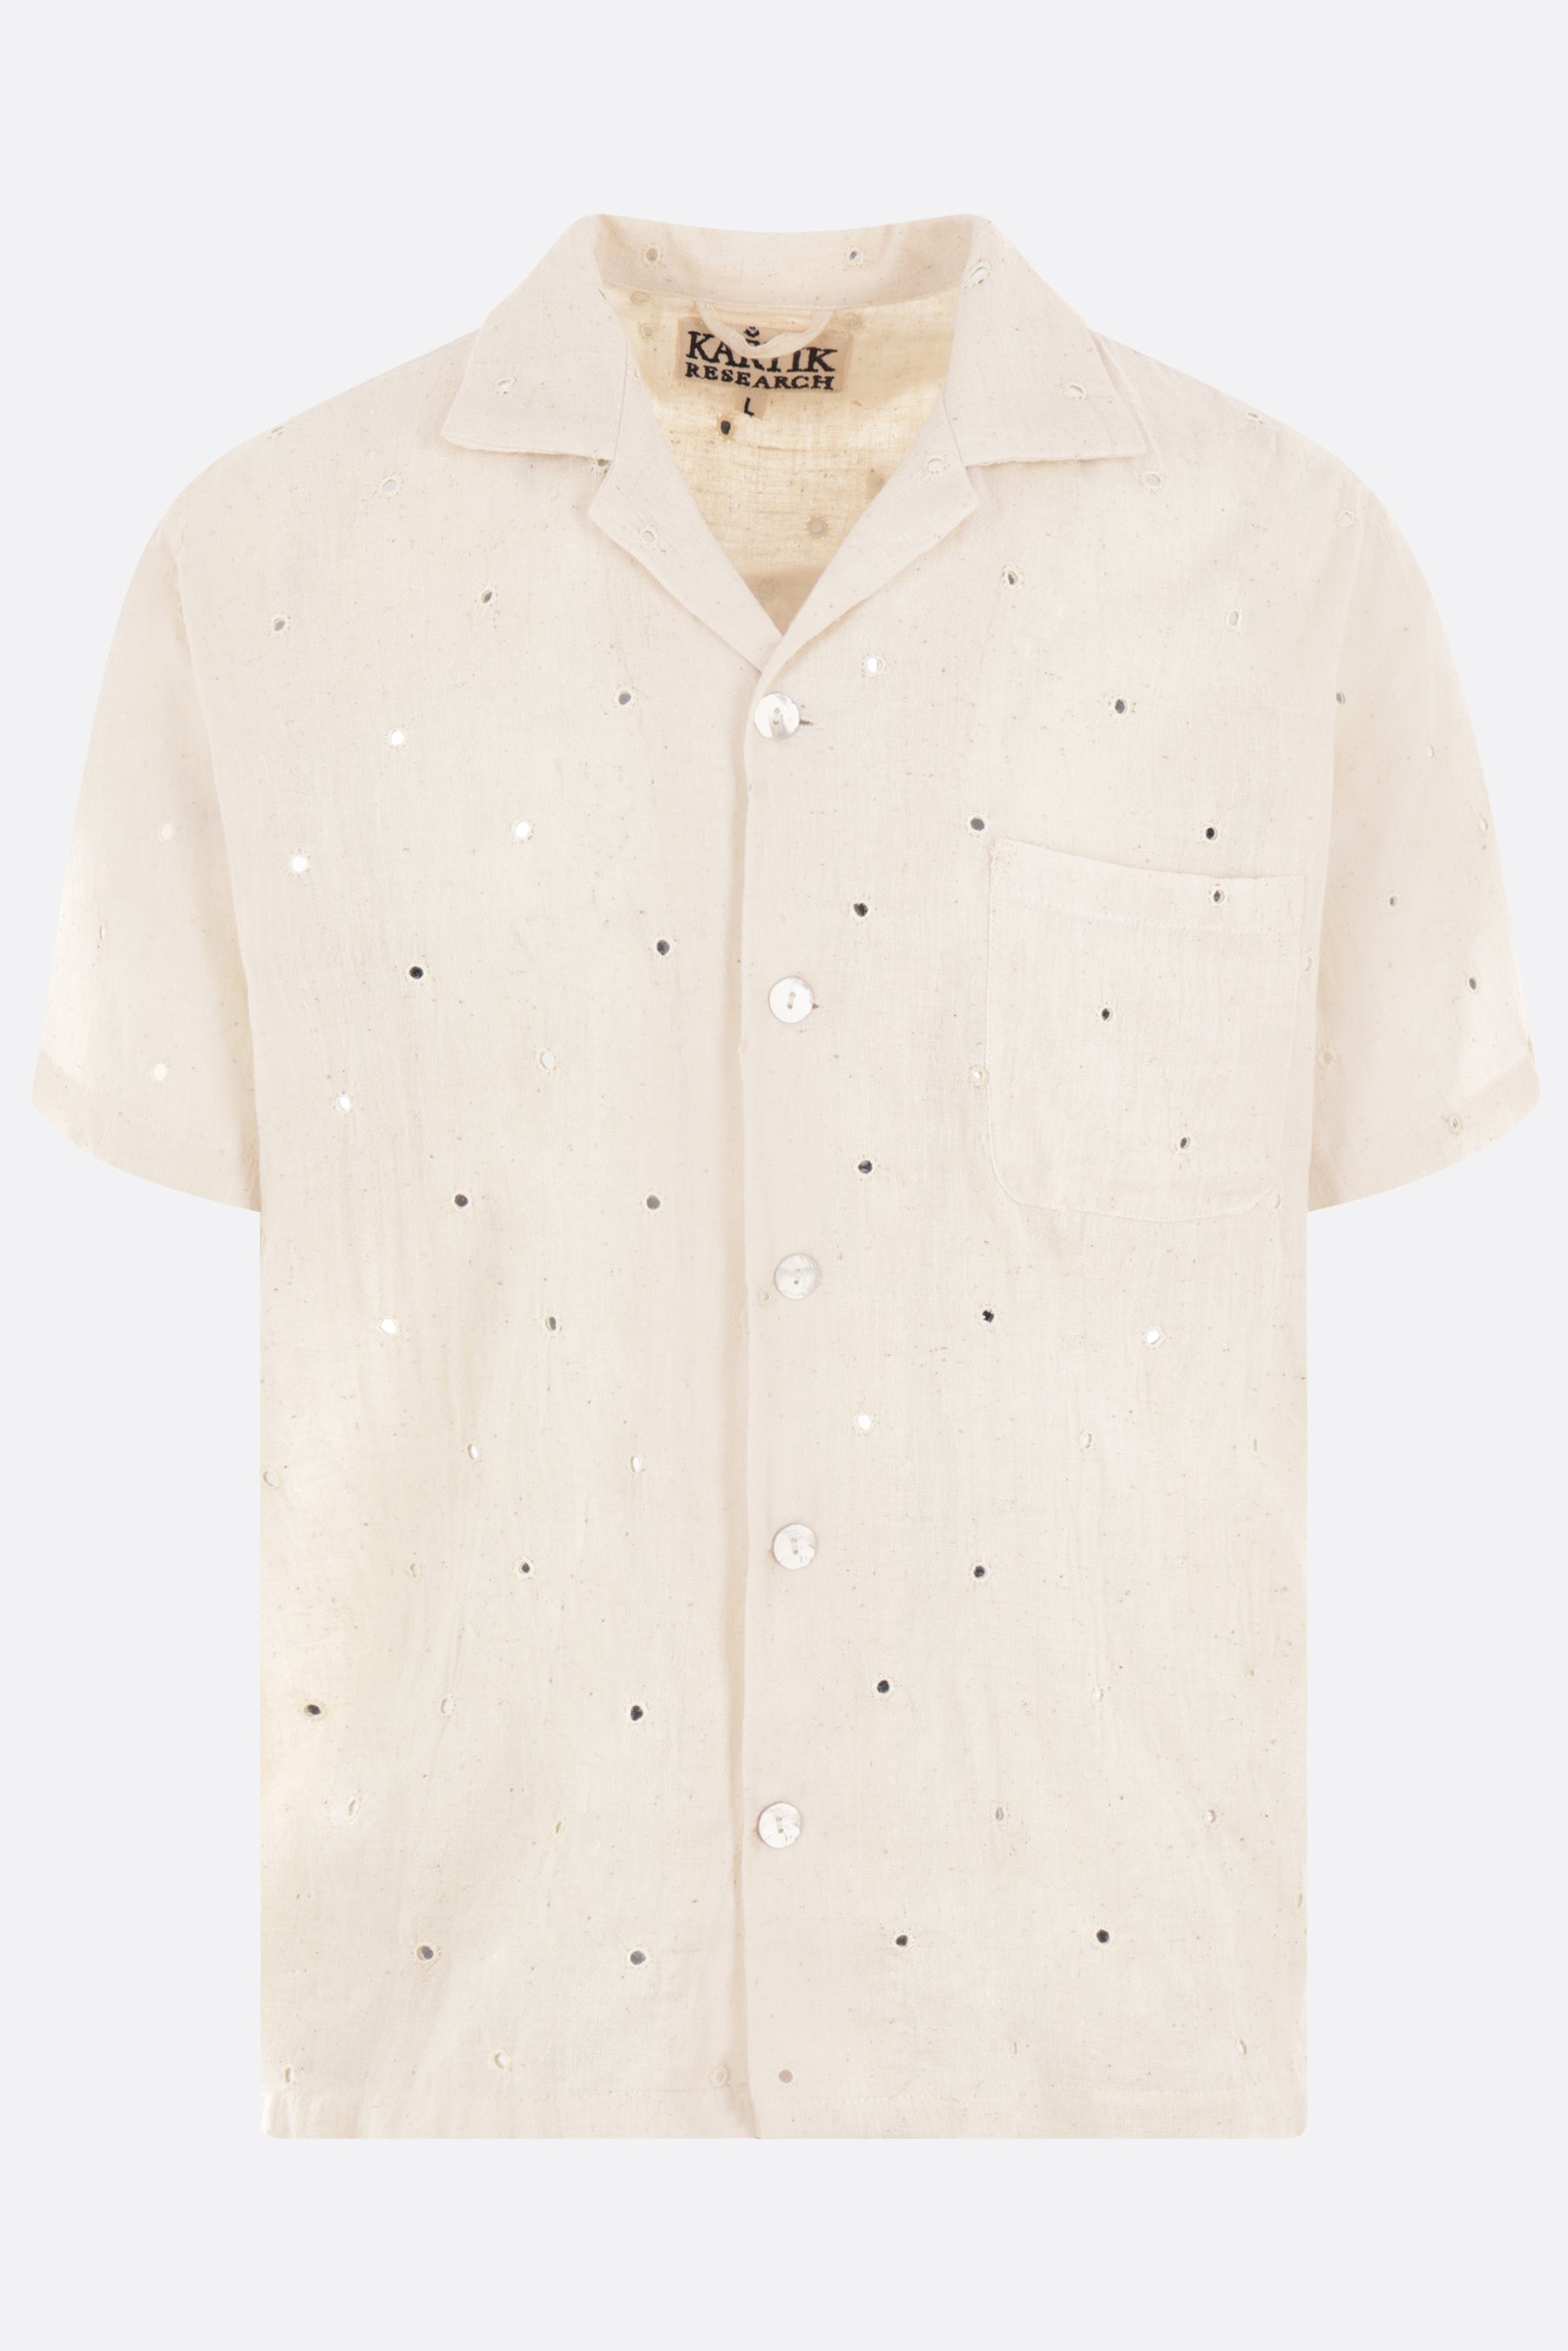 cotton canvas Camp shirt with Mirror embroideries